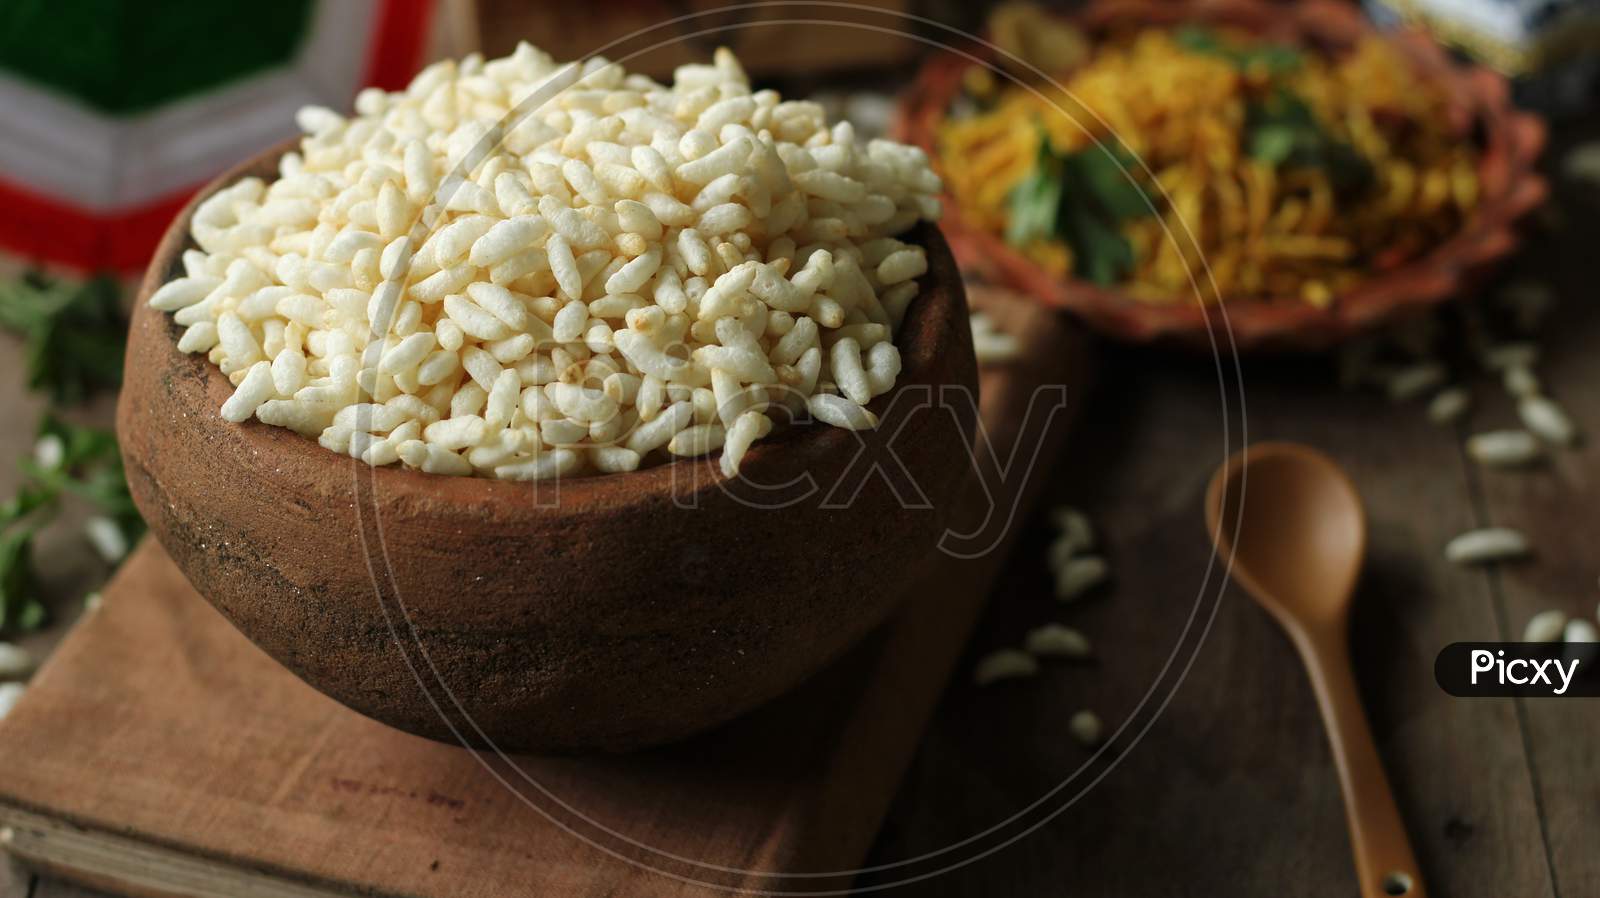 Indian evening snacks. puffed rice, served on an earthen pot